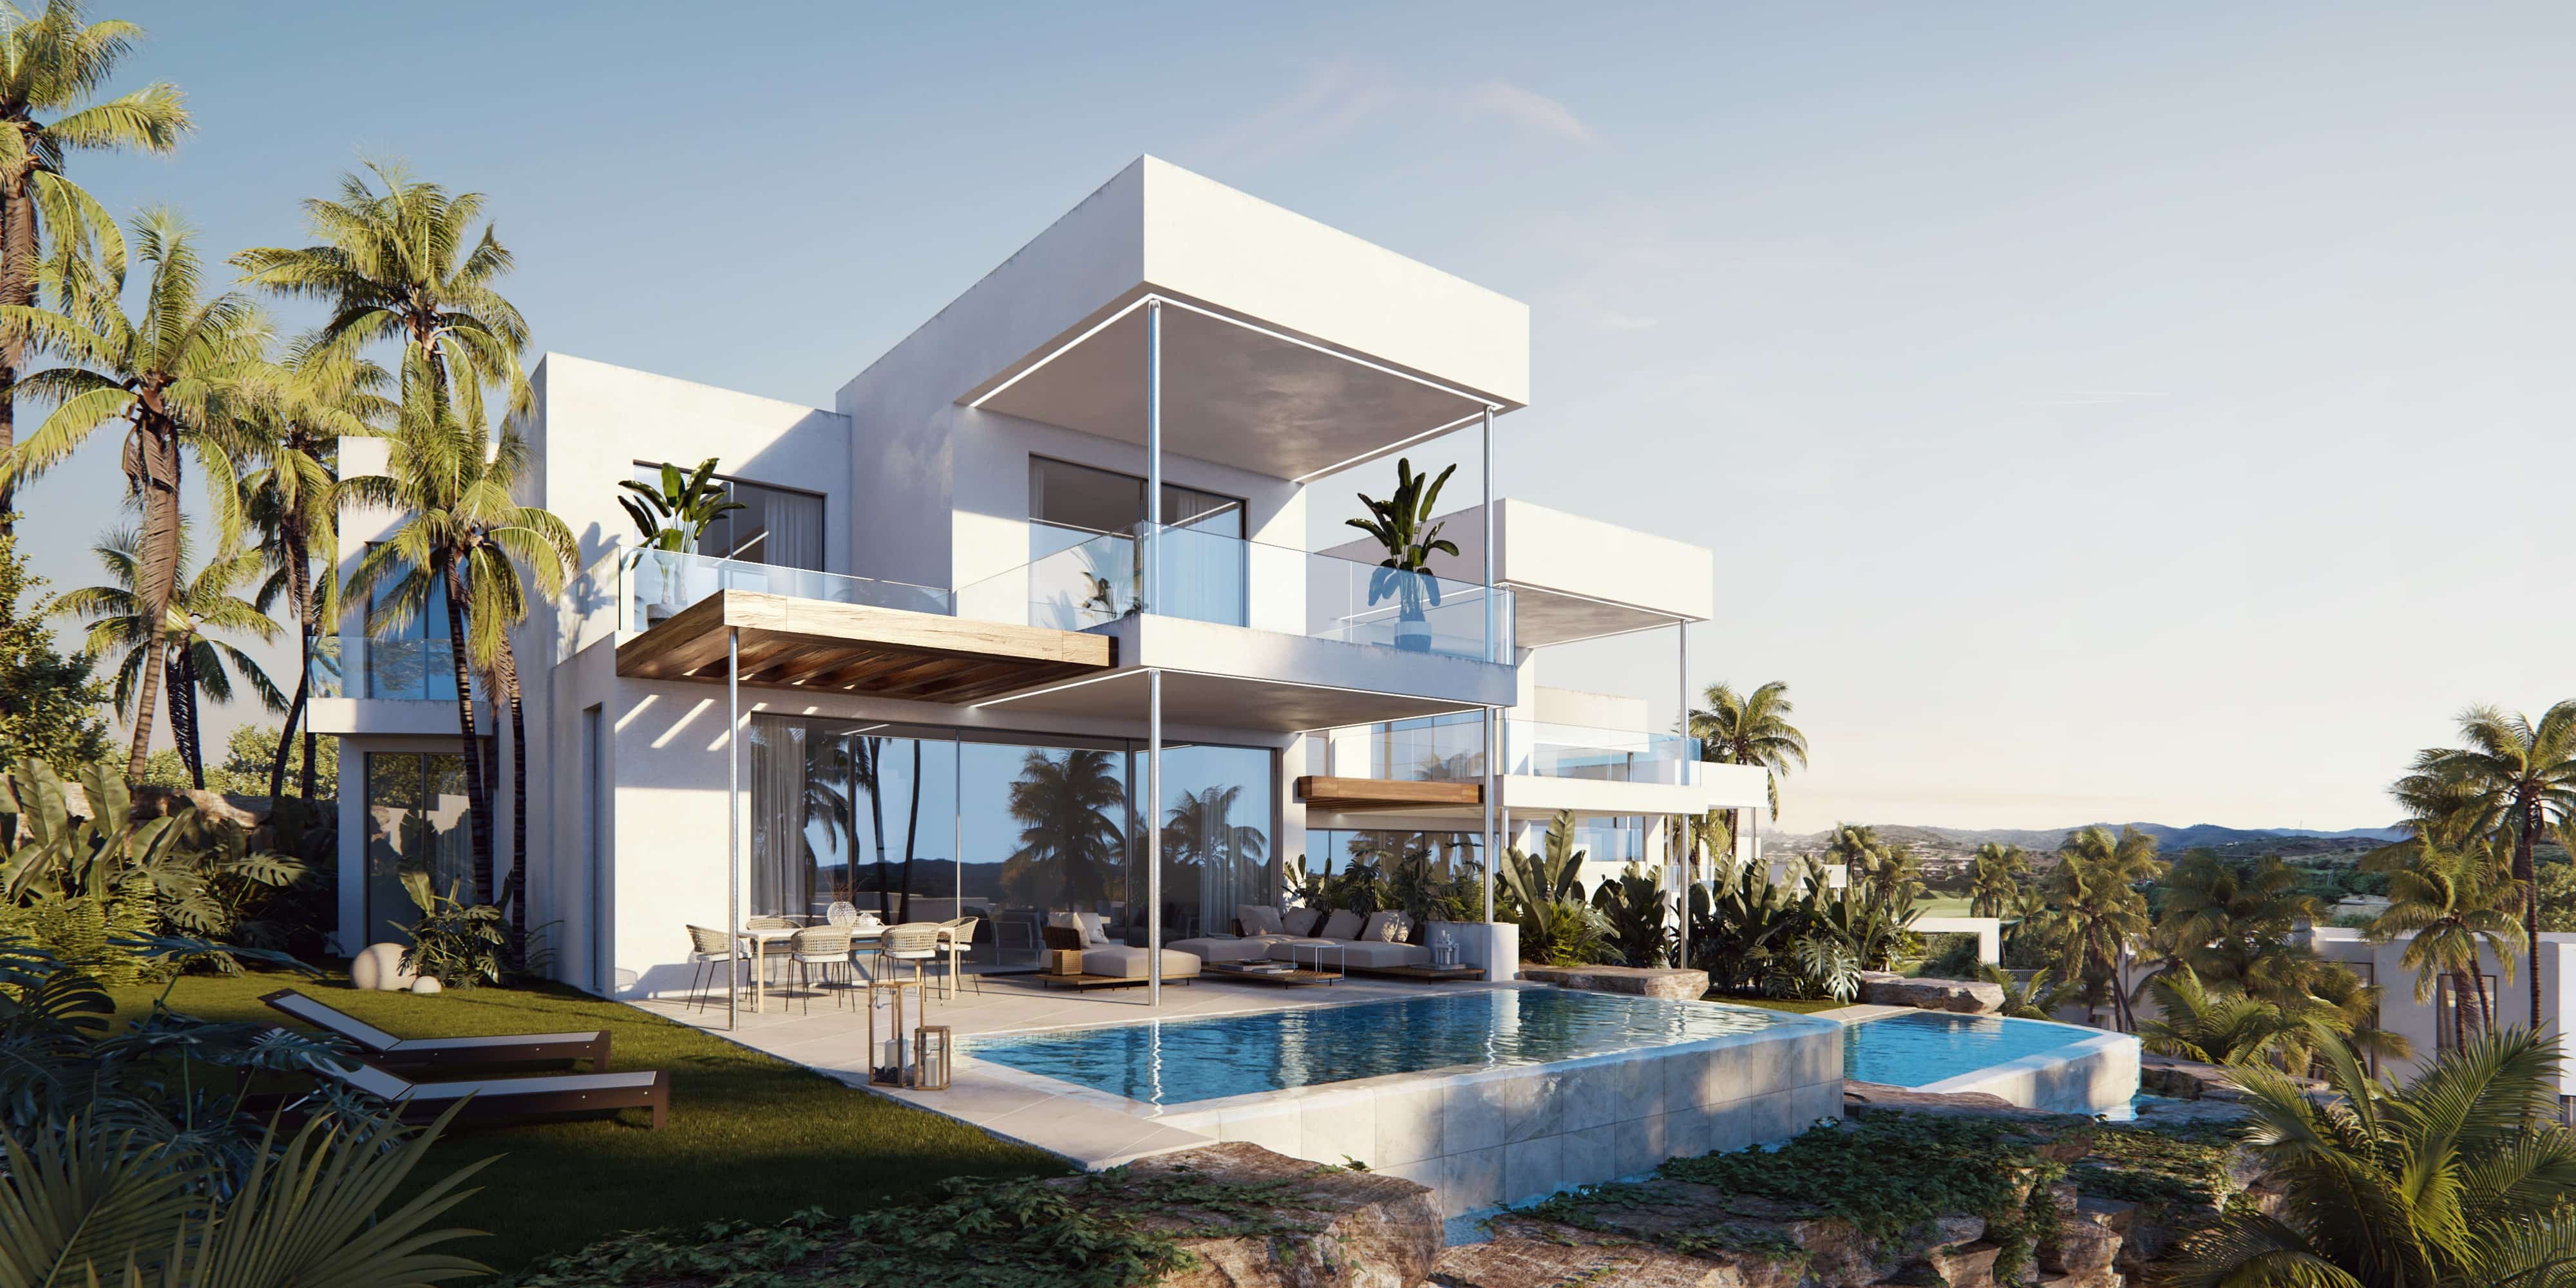 Realistic Rendering In Architecture – The Advantages Every Industry Expert Should Know